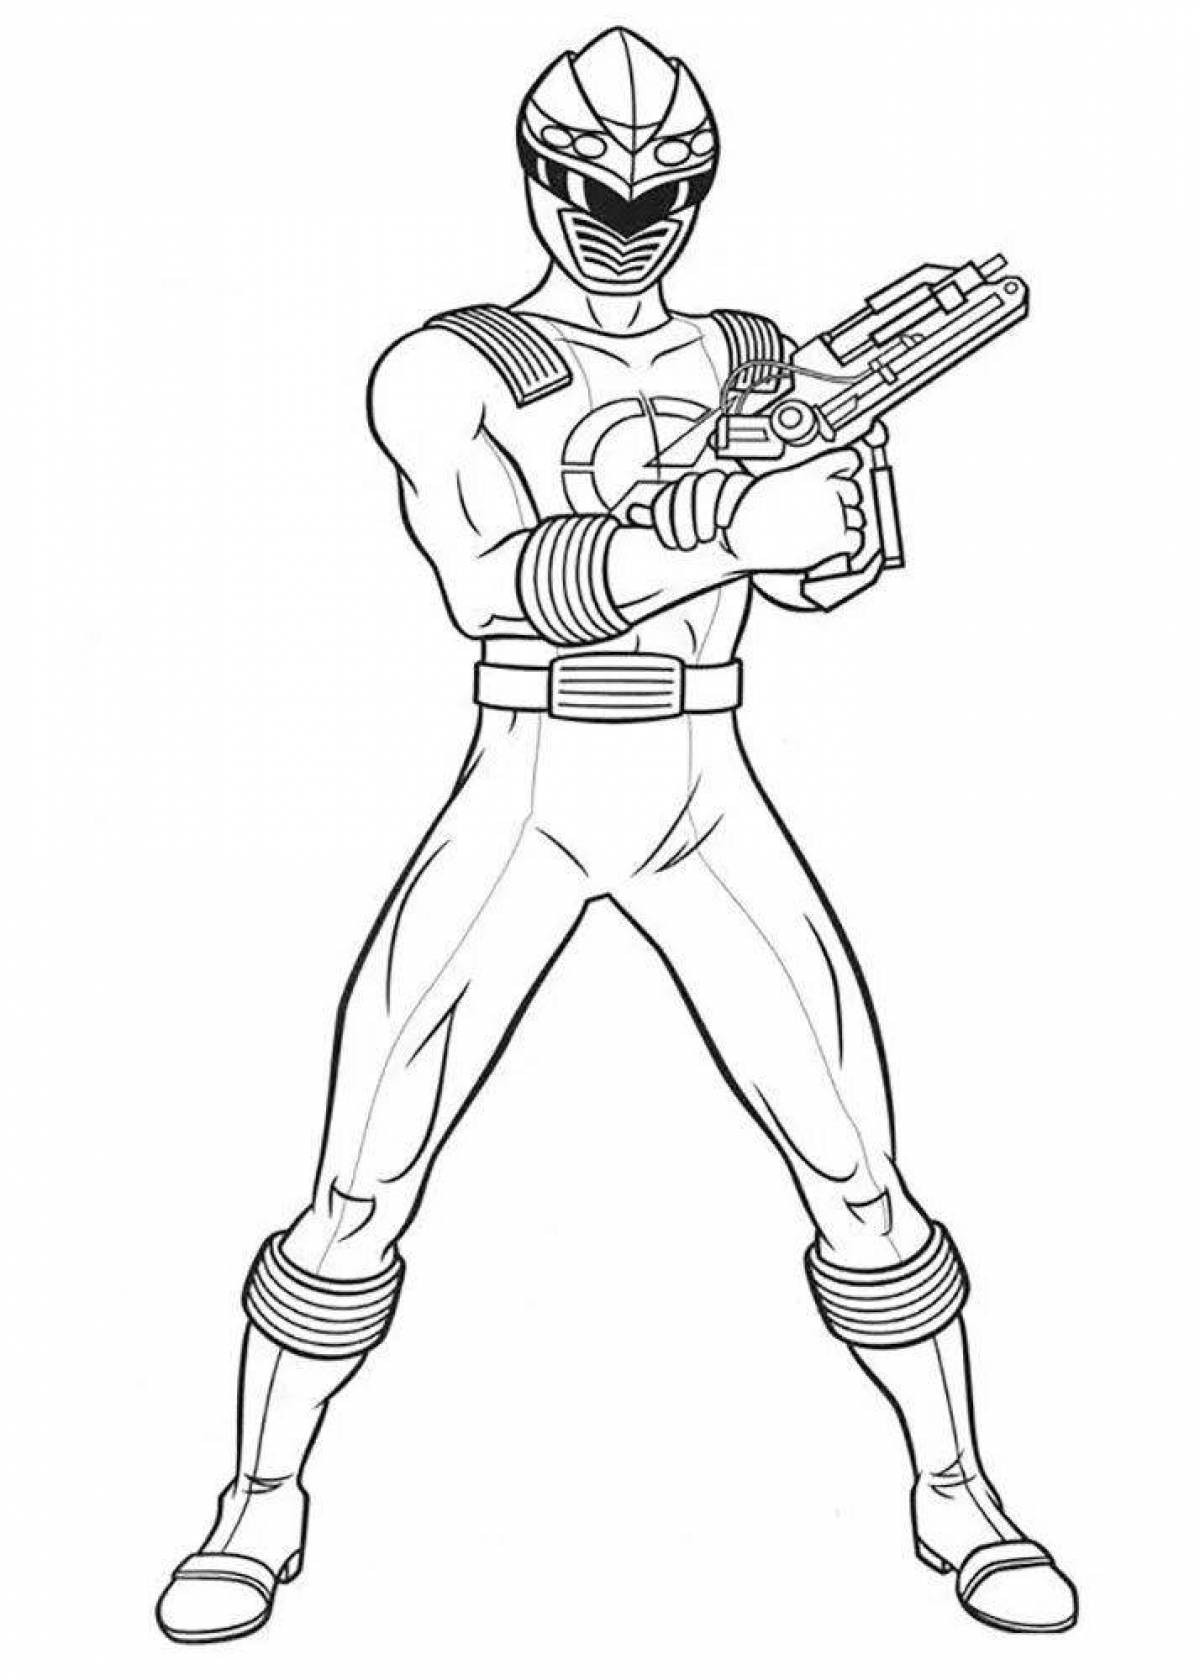 Majestic power coloring page